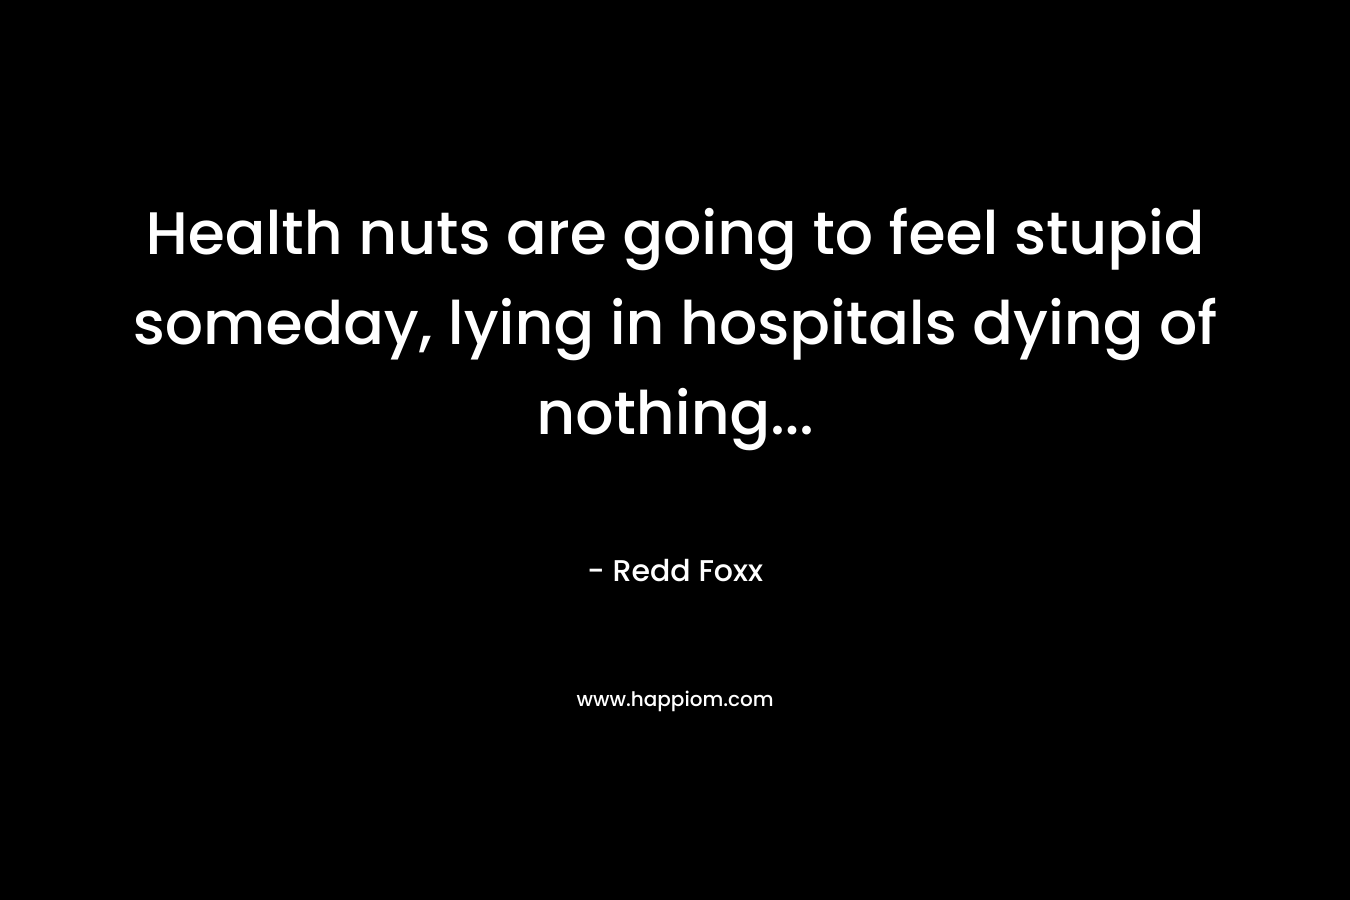 Health nuts are going to feel stupid someday, lying in hospitals dying of nothing...